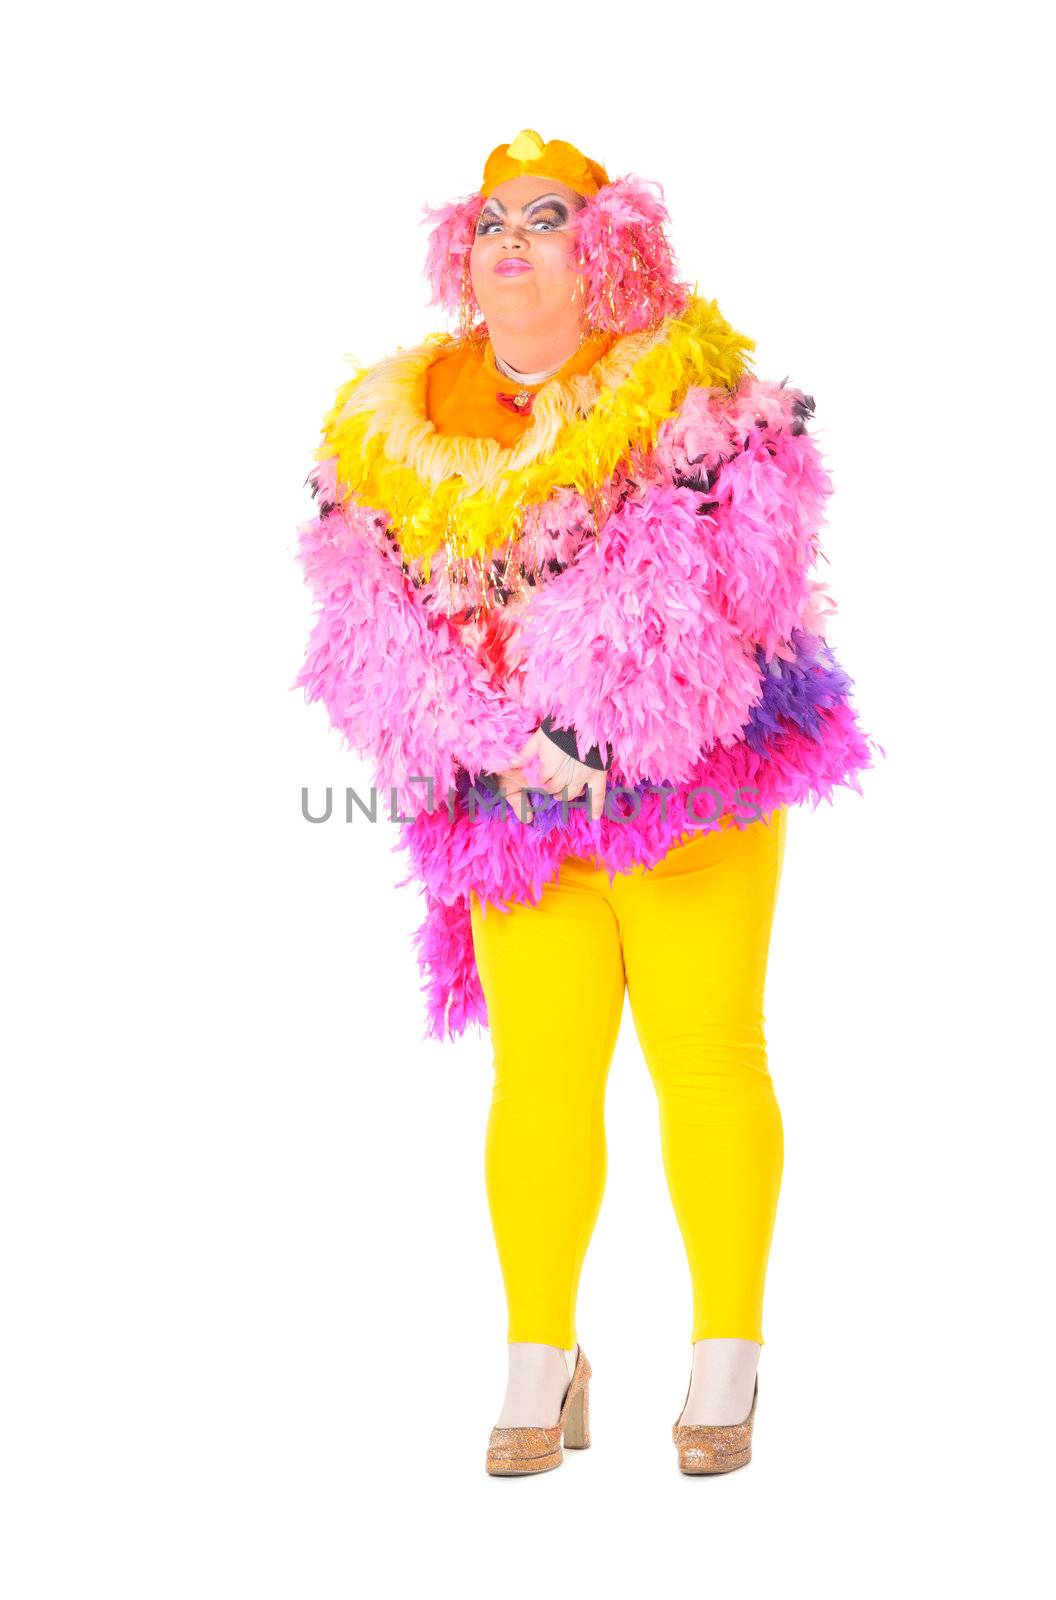 Cheerful man, Drag Queen, in a Female Suit, over white background